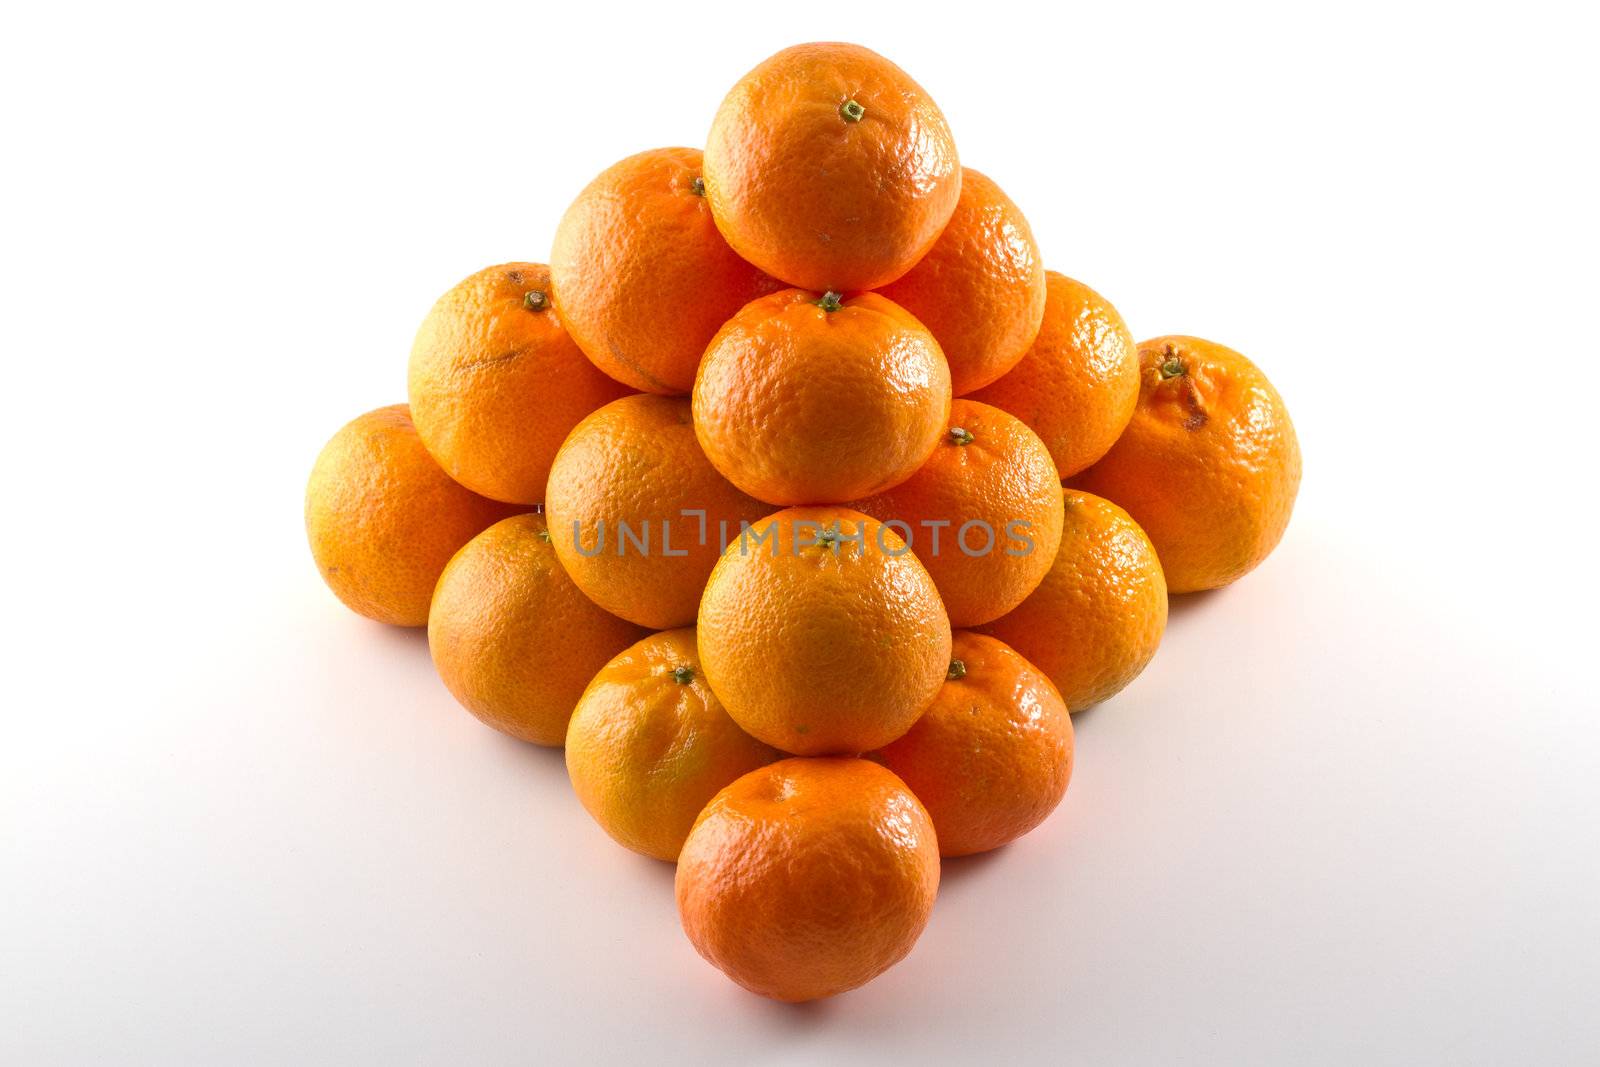 Clementines arranged in a pyramid shape isolated on white background